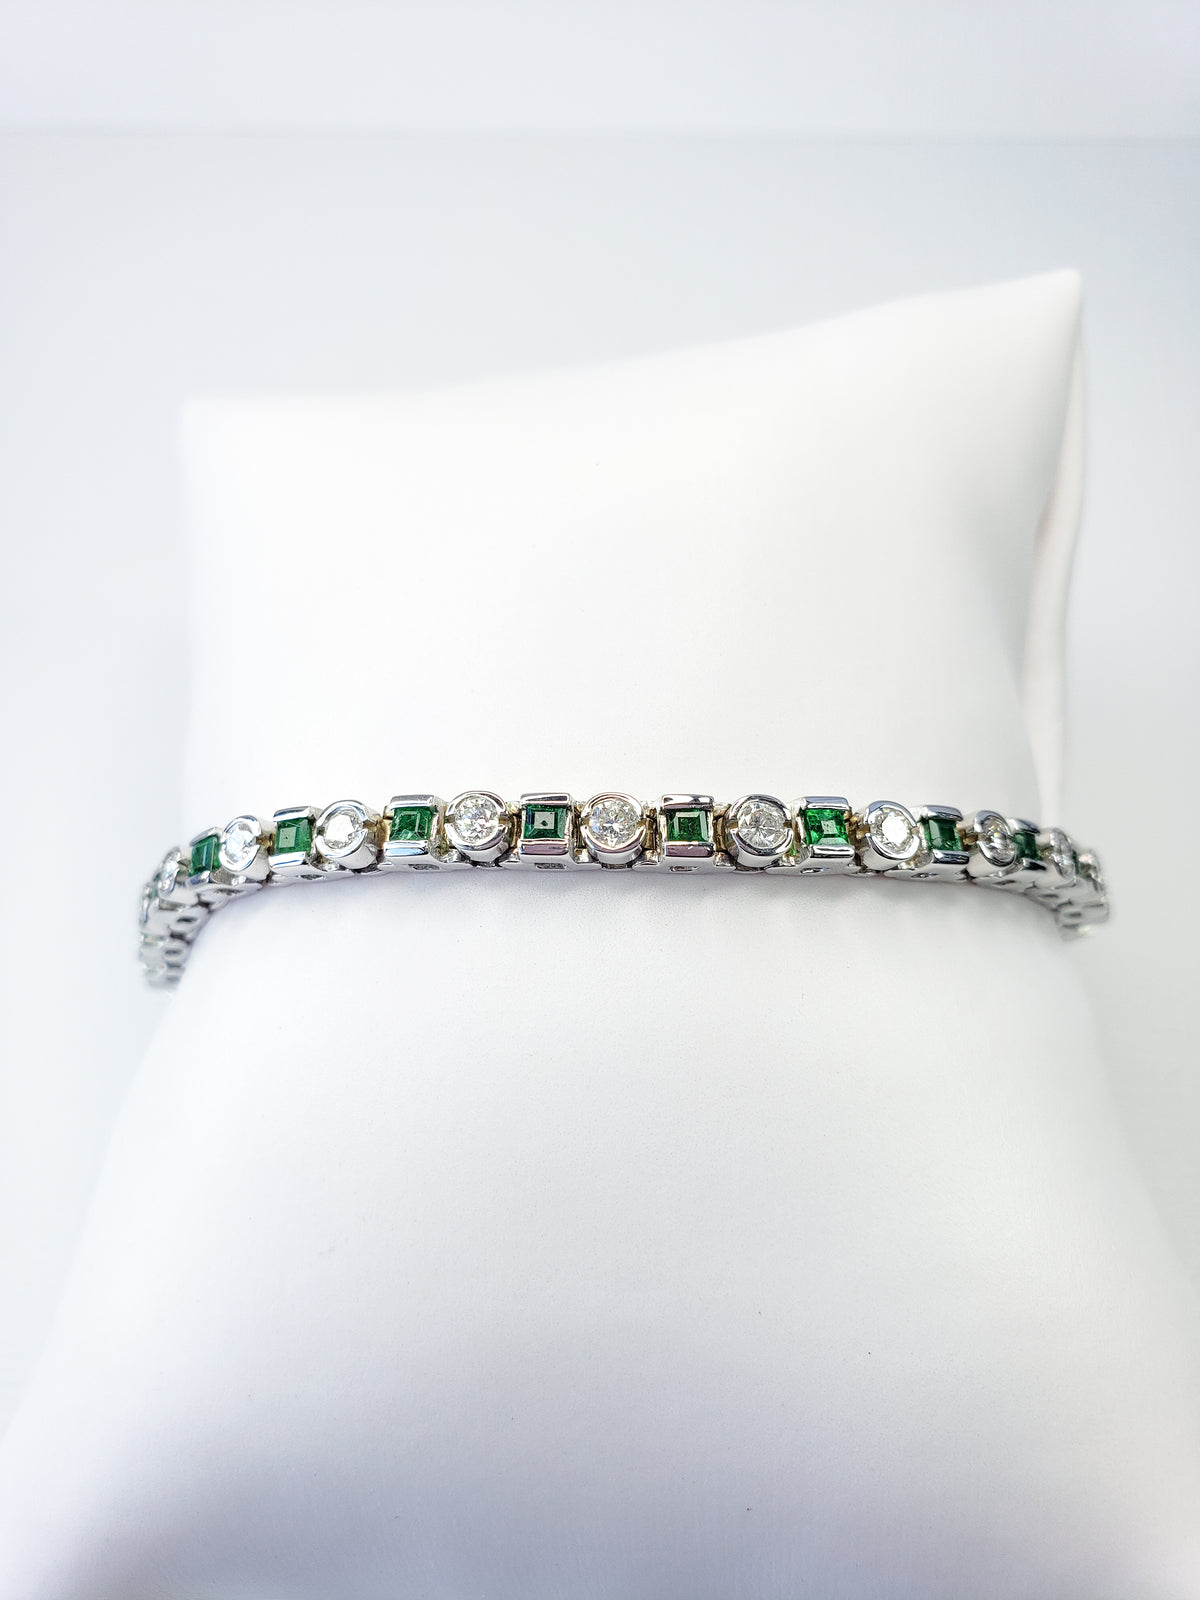 Emerald and Diamond Tennis Bracelet made in 14K White Gold